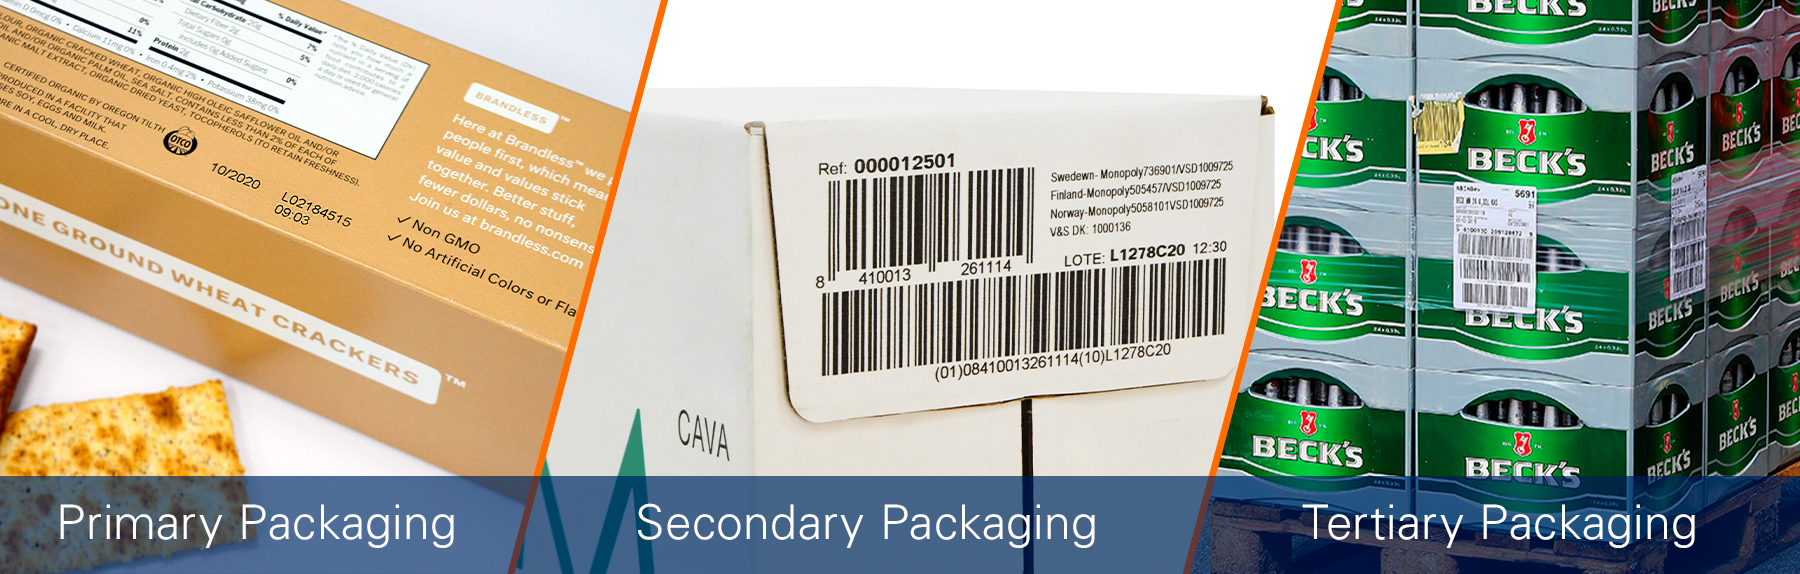 primary-secondary-tertiary-packaging